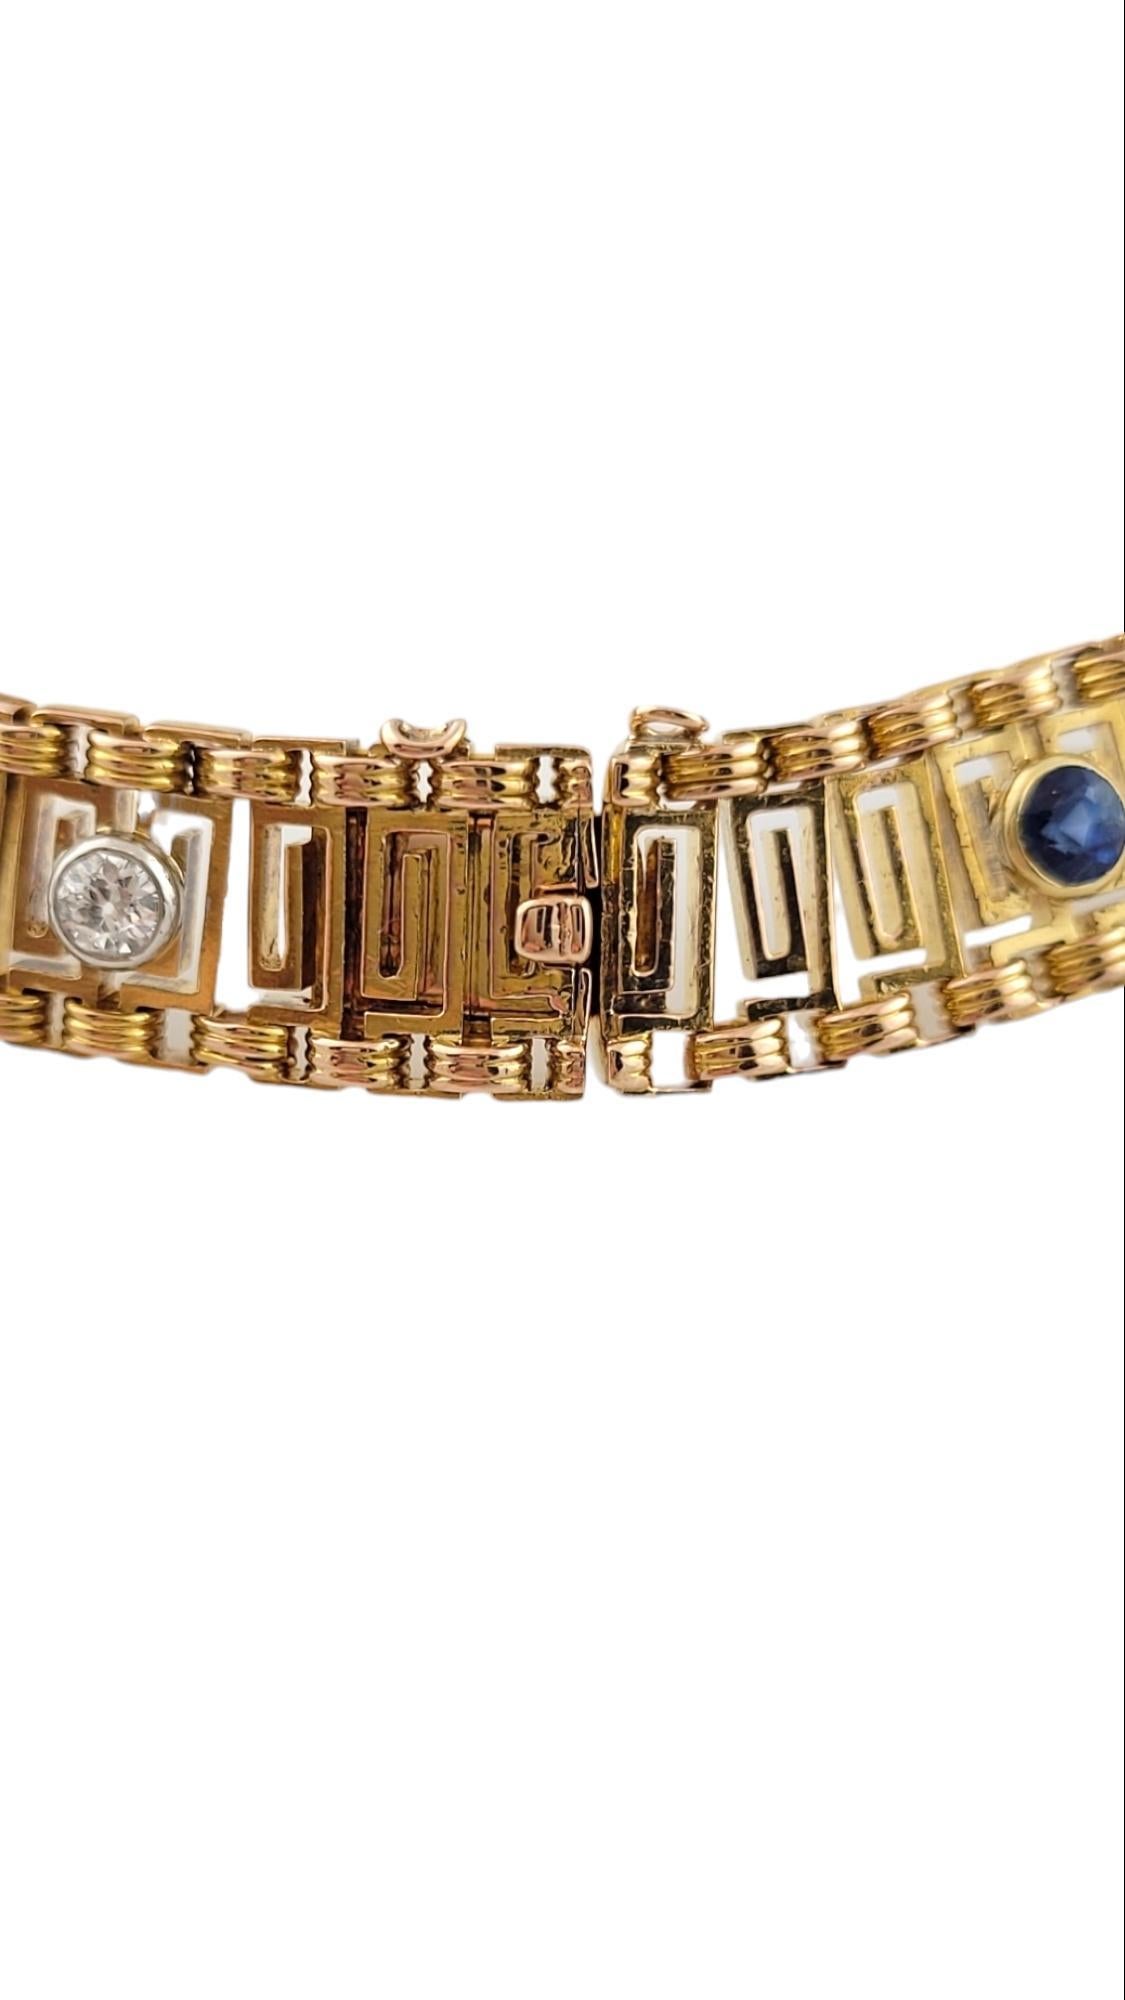 Antique 18K Yellow Gold Diamond Bracelet #15828 In Good Condition For Sale In Washington Depot, CT